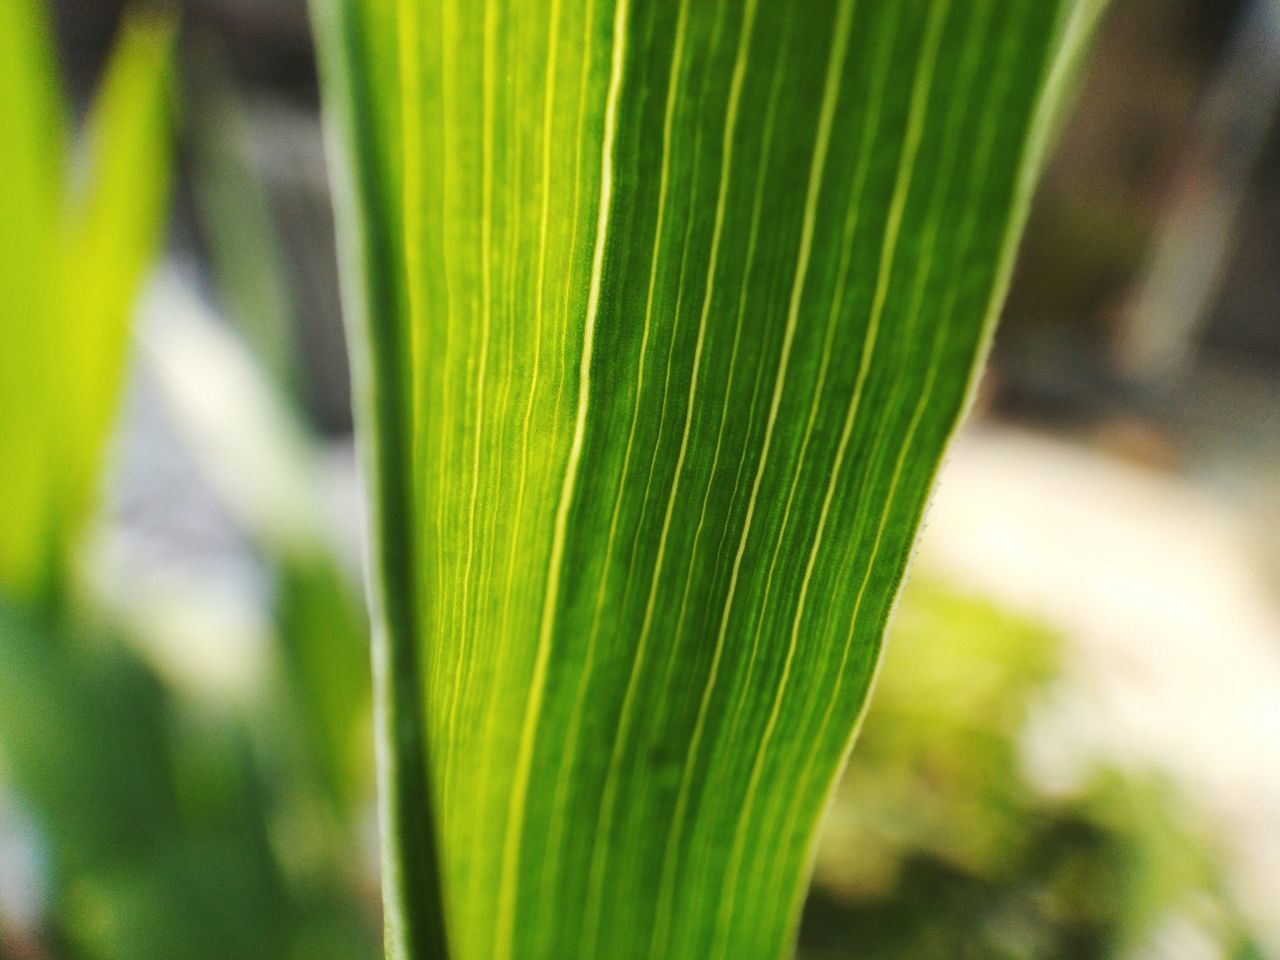 CLOSE-UP OF FRESH GREEN PLANT